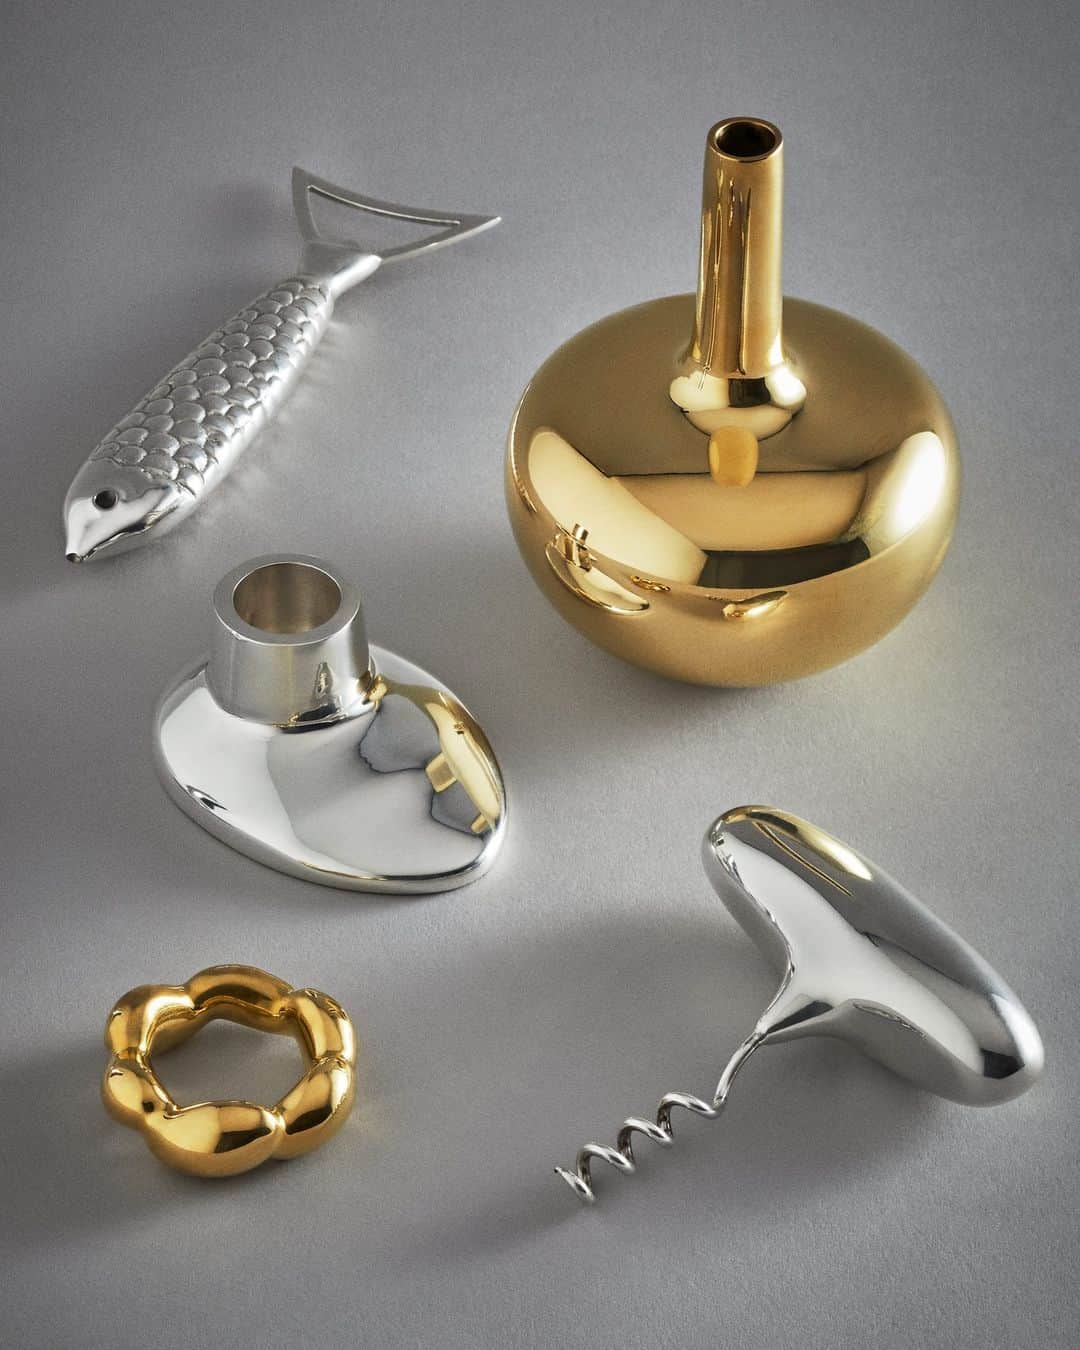 ARKETのインスタグラム：「A premium collection of small yet weighty objects, ideal for gift-giving. Cast from recycled brass, sometimes silver-plated, and designed to add a delicate spark to the home.   Brass is a living material. With time, it will develop a beautiful patina through oxidation. If you prefer the original shiny finish, it can be restored using a non-abrasive polish to remove tarnishing. For silver-plated objects, avoid exposure to water to prevent permanent staining. Explore our brass collection: link in bio. - #ARKET」